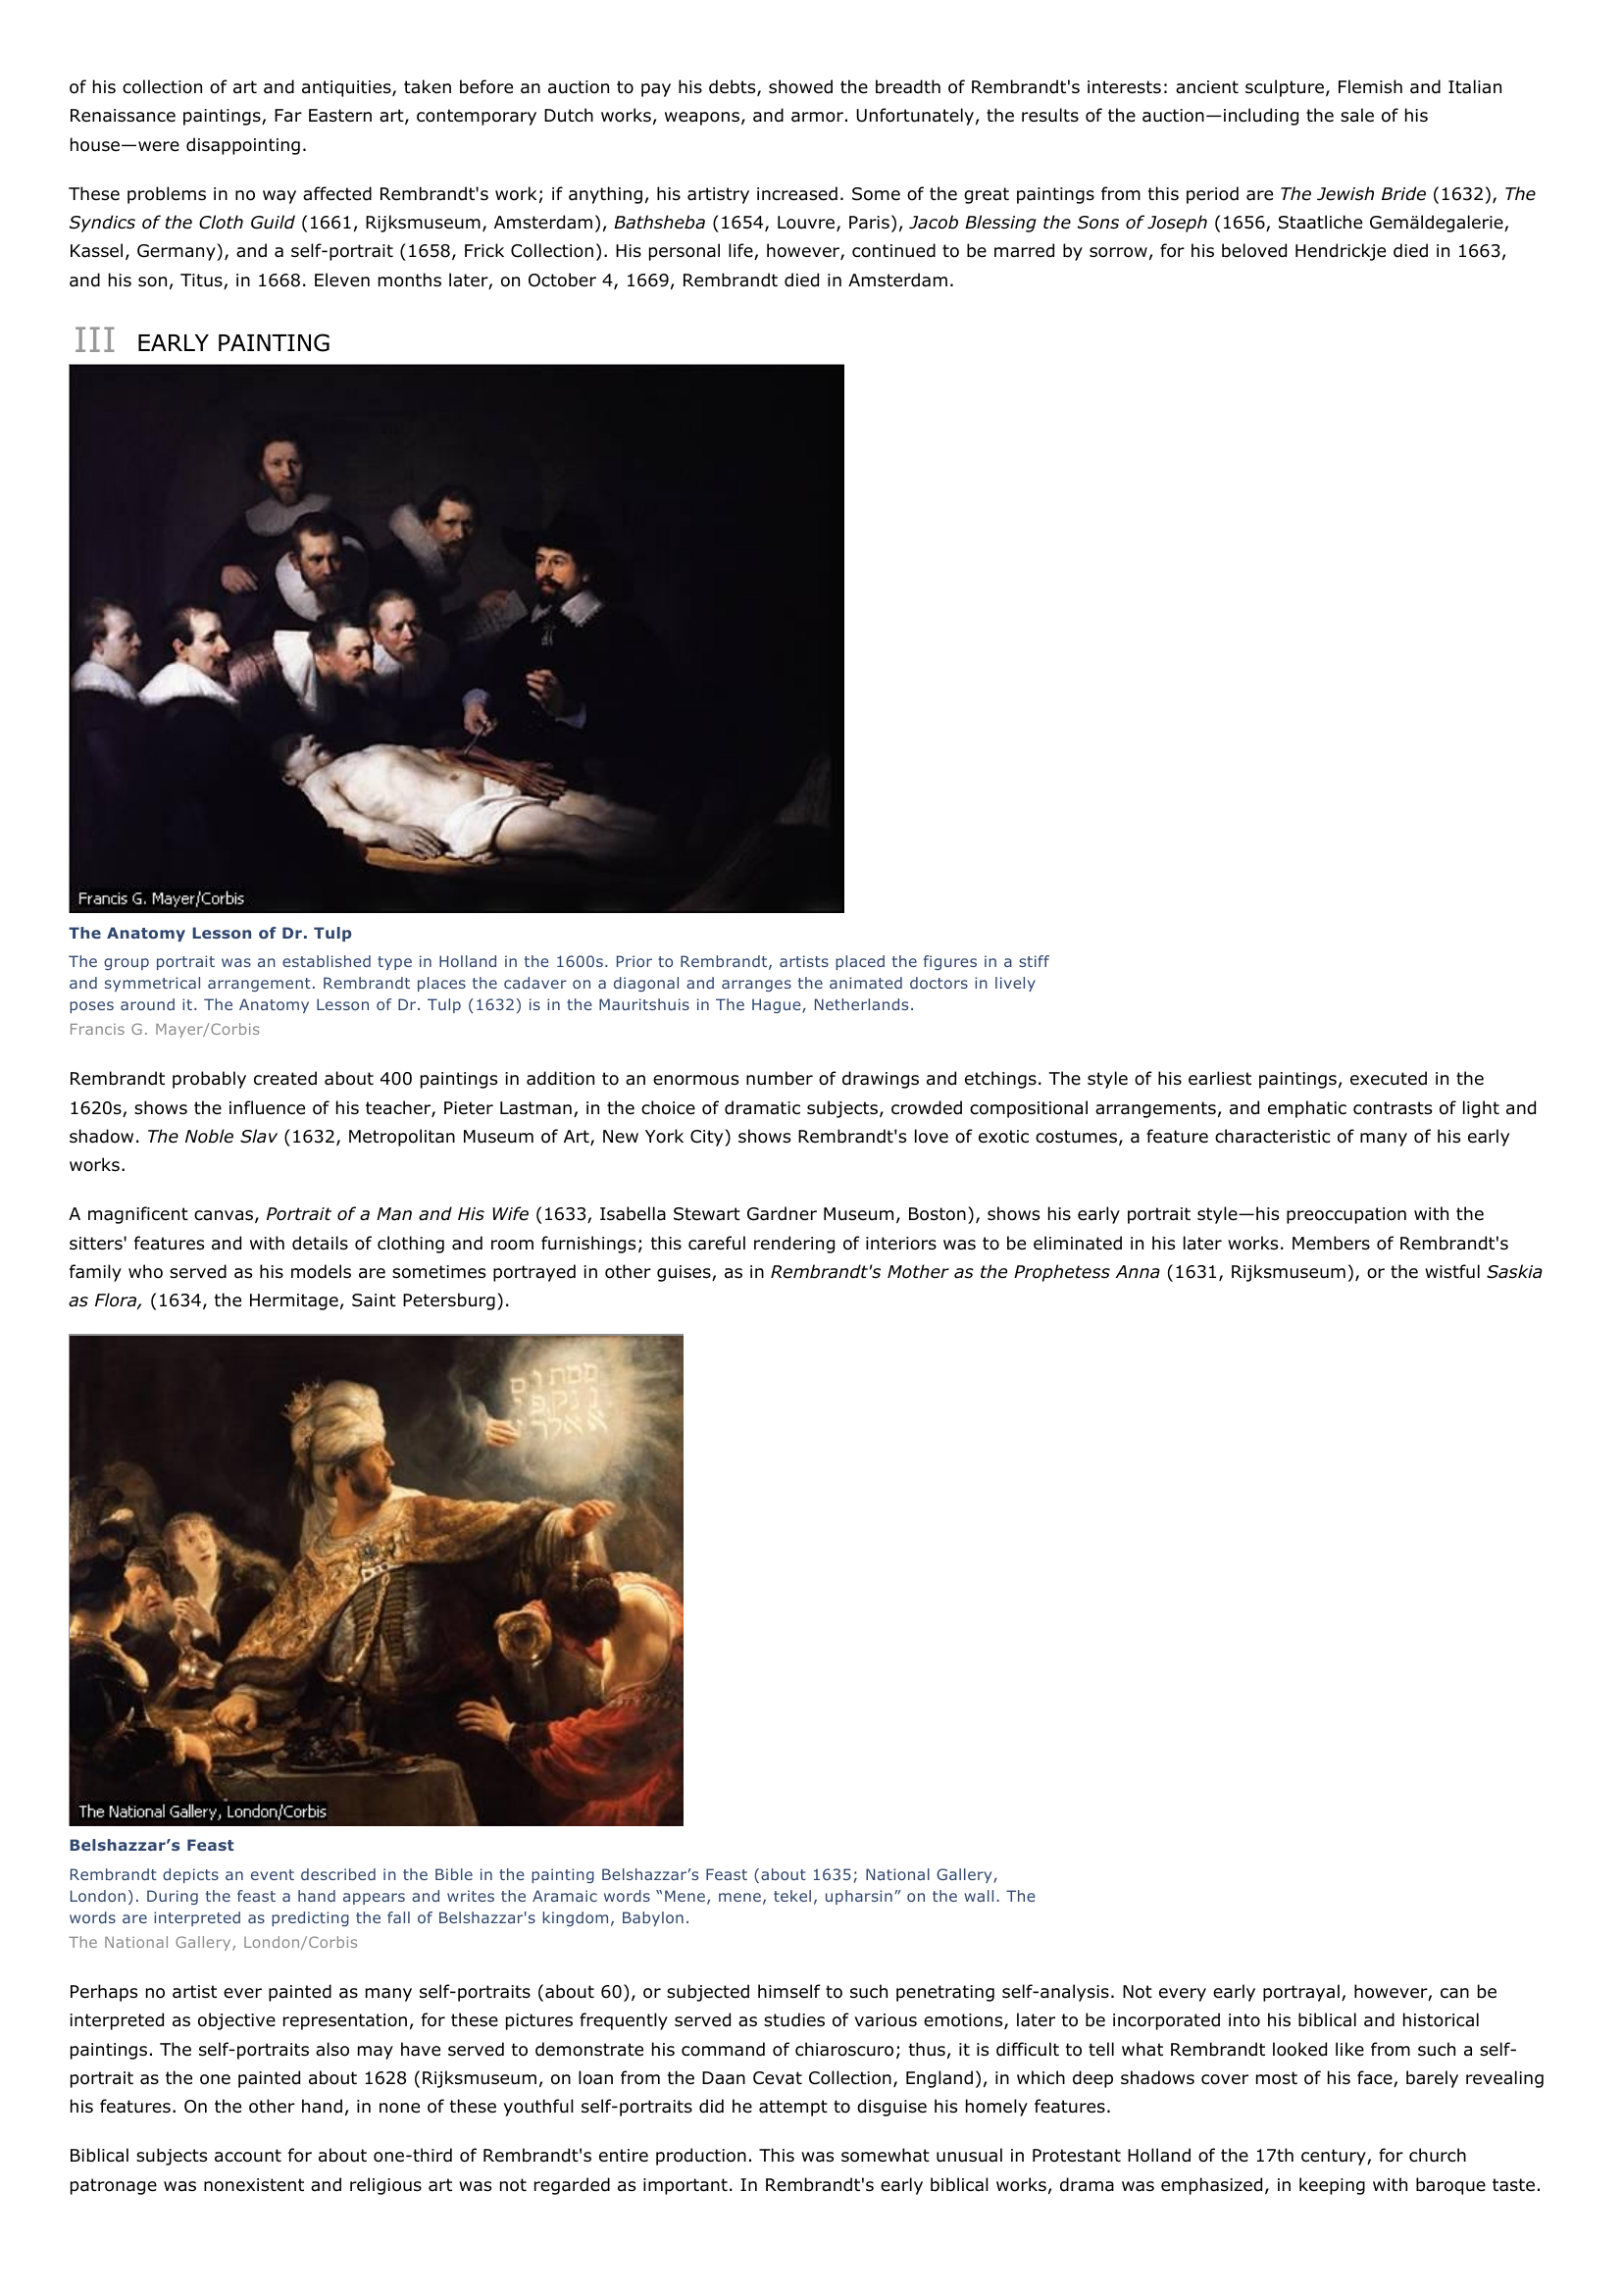 Prévisualisation du document Rembrandt
I

INTRODUCTION

Rembrandt (1606-1669), Dutch baroque artist, who ranks as one of the greatest painters in the history of Western art.